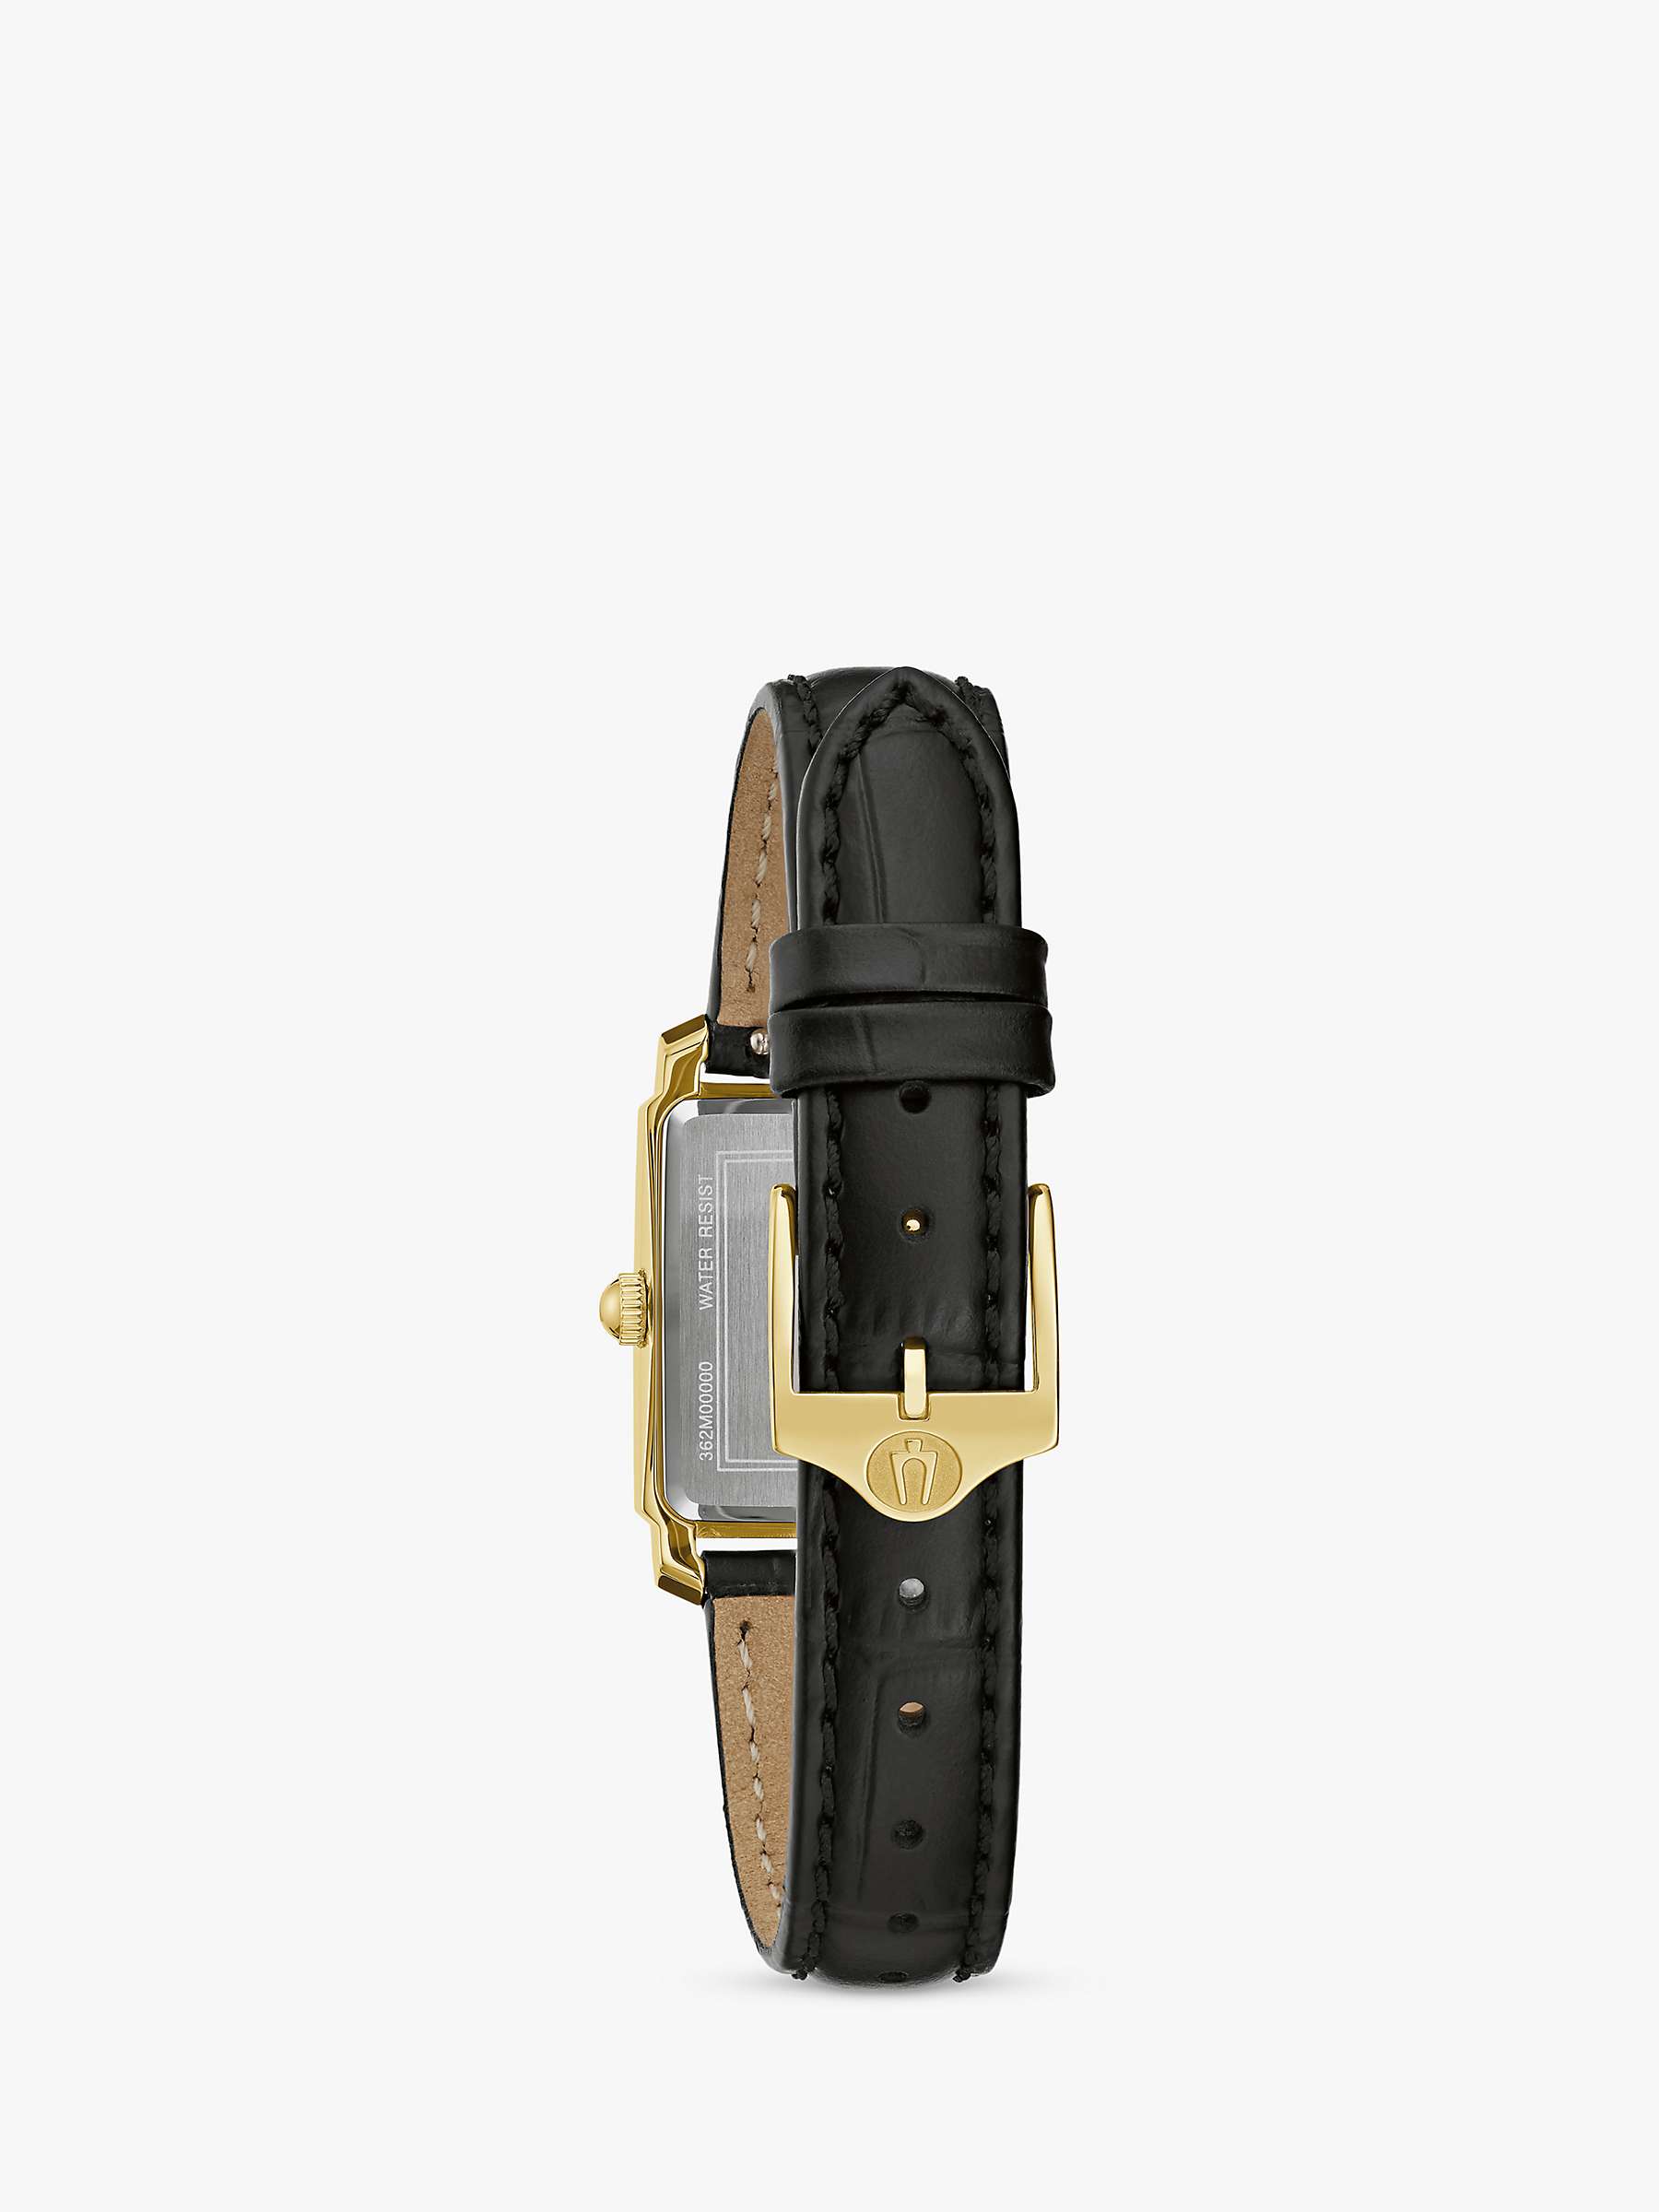 Buy Bulova 97P166 Woman's Classic Diamond Leather Strap Watch, Black/Mother-Of-Pearl Online at johnlewis.com